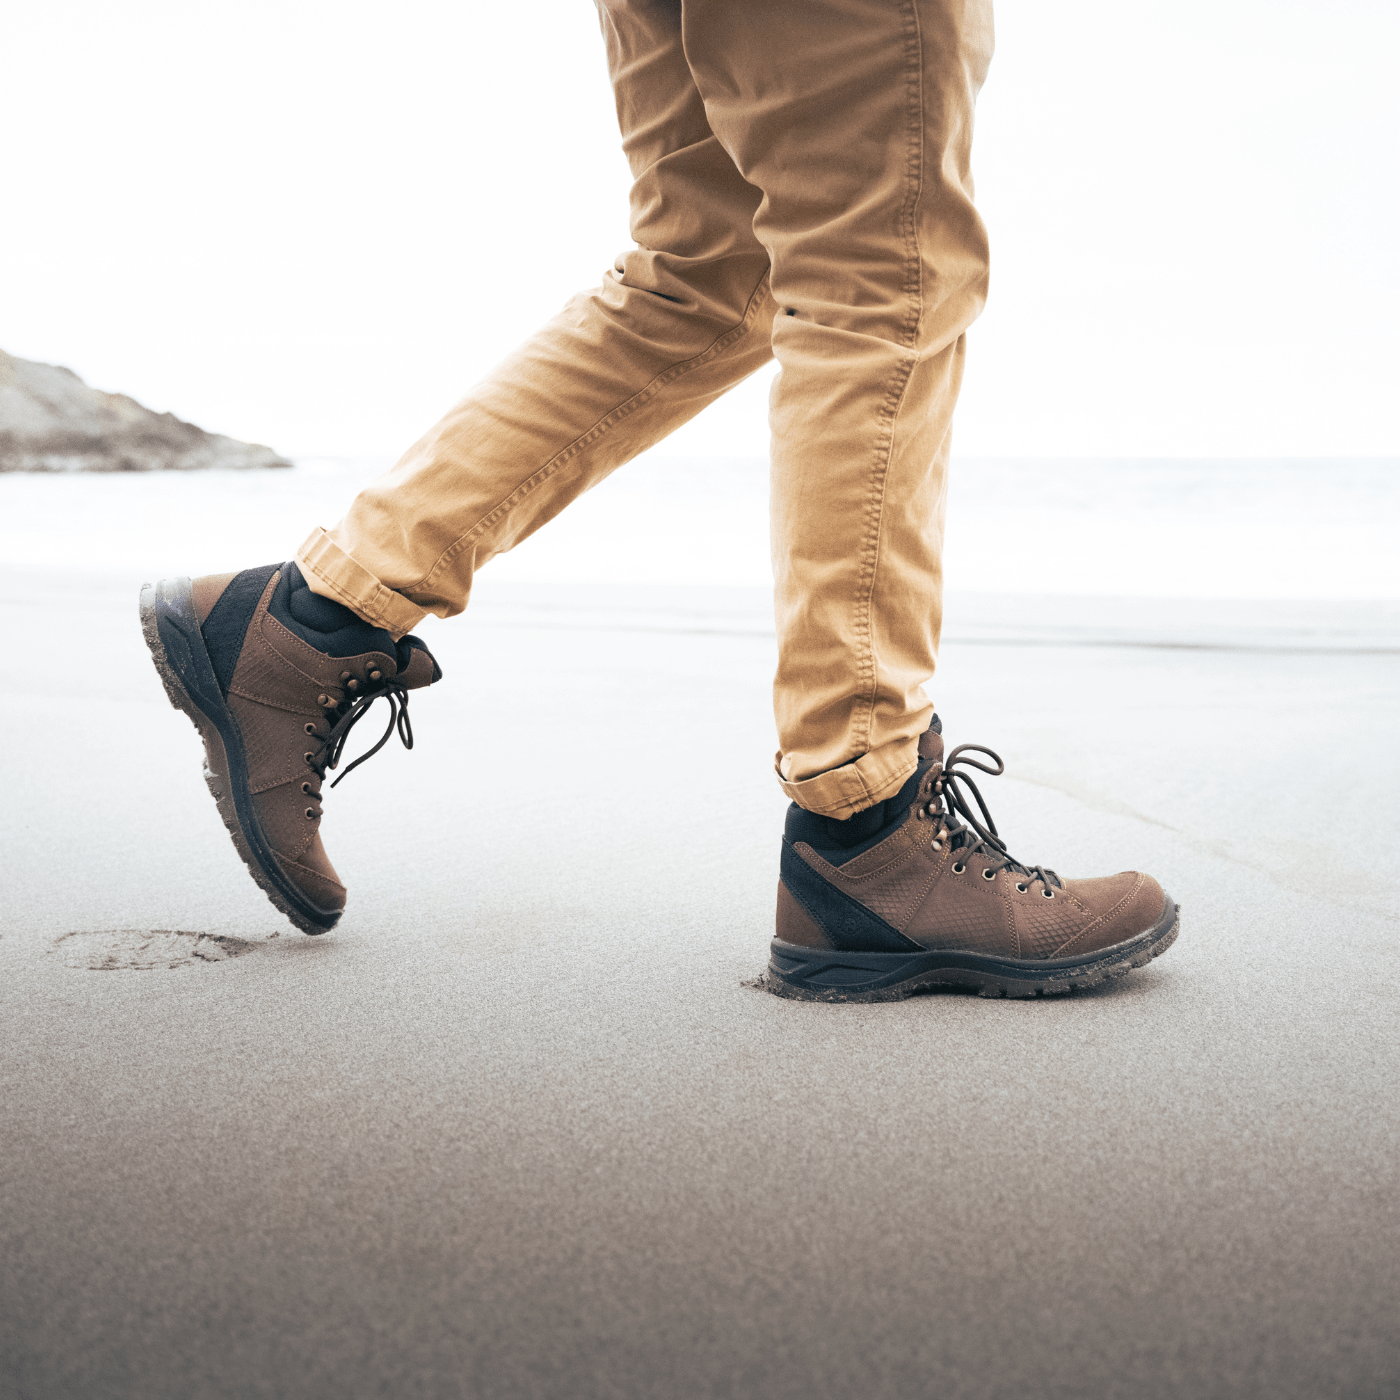 man walking in leather hiking boots with tan pants on the beach to show they are waterproof